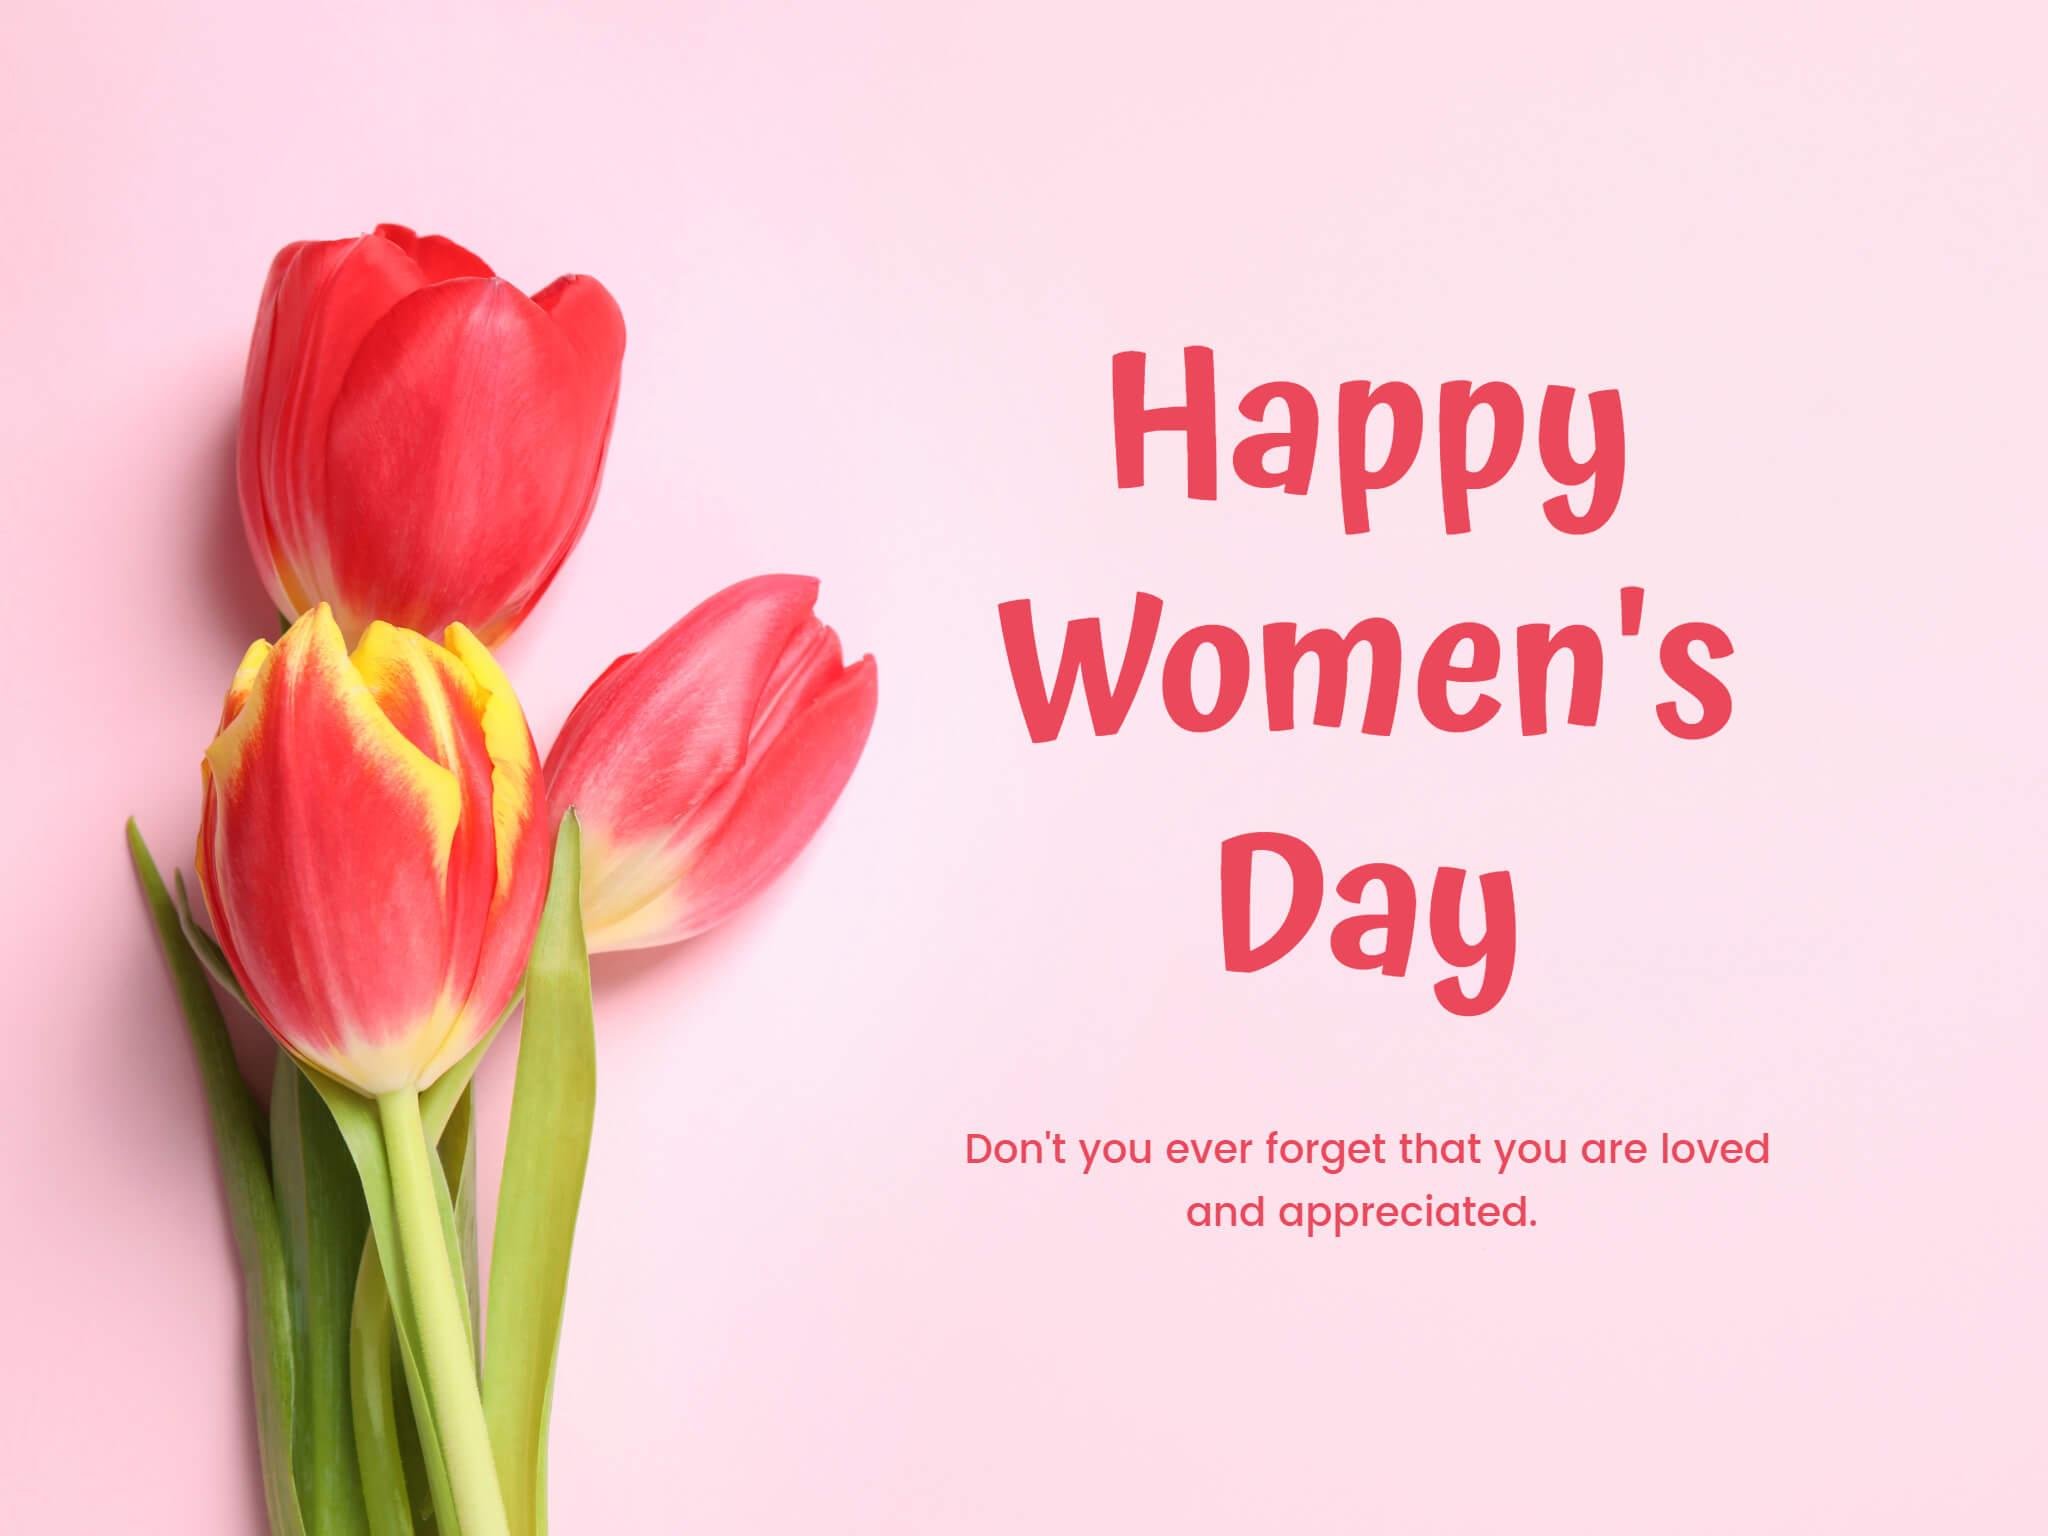 5520 Sketches Womens Day Images Stock Photos  Vectors  Shutterstock